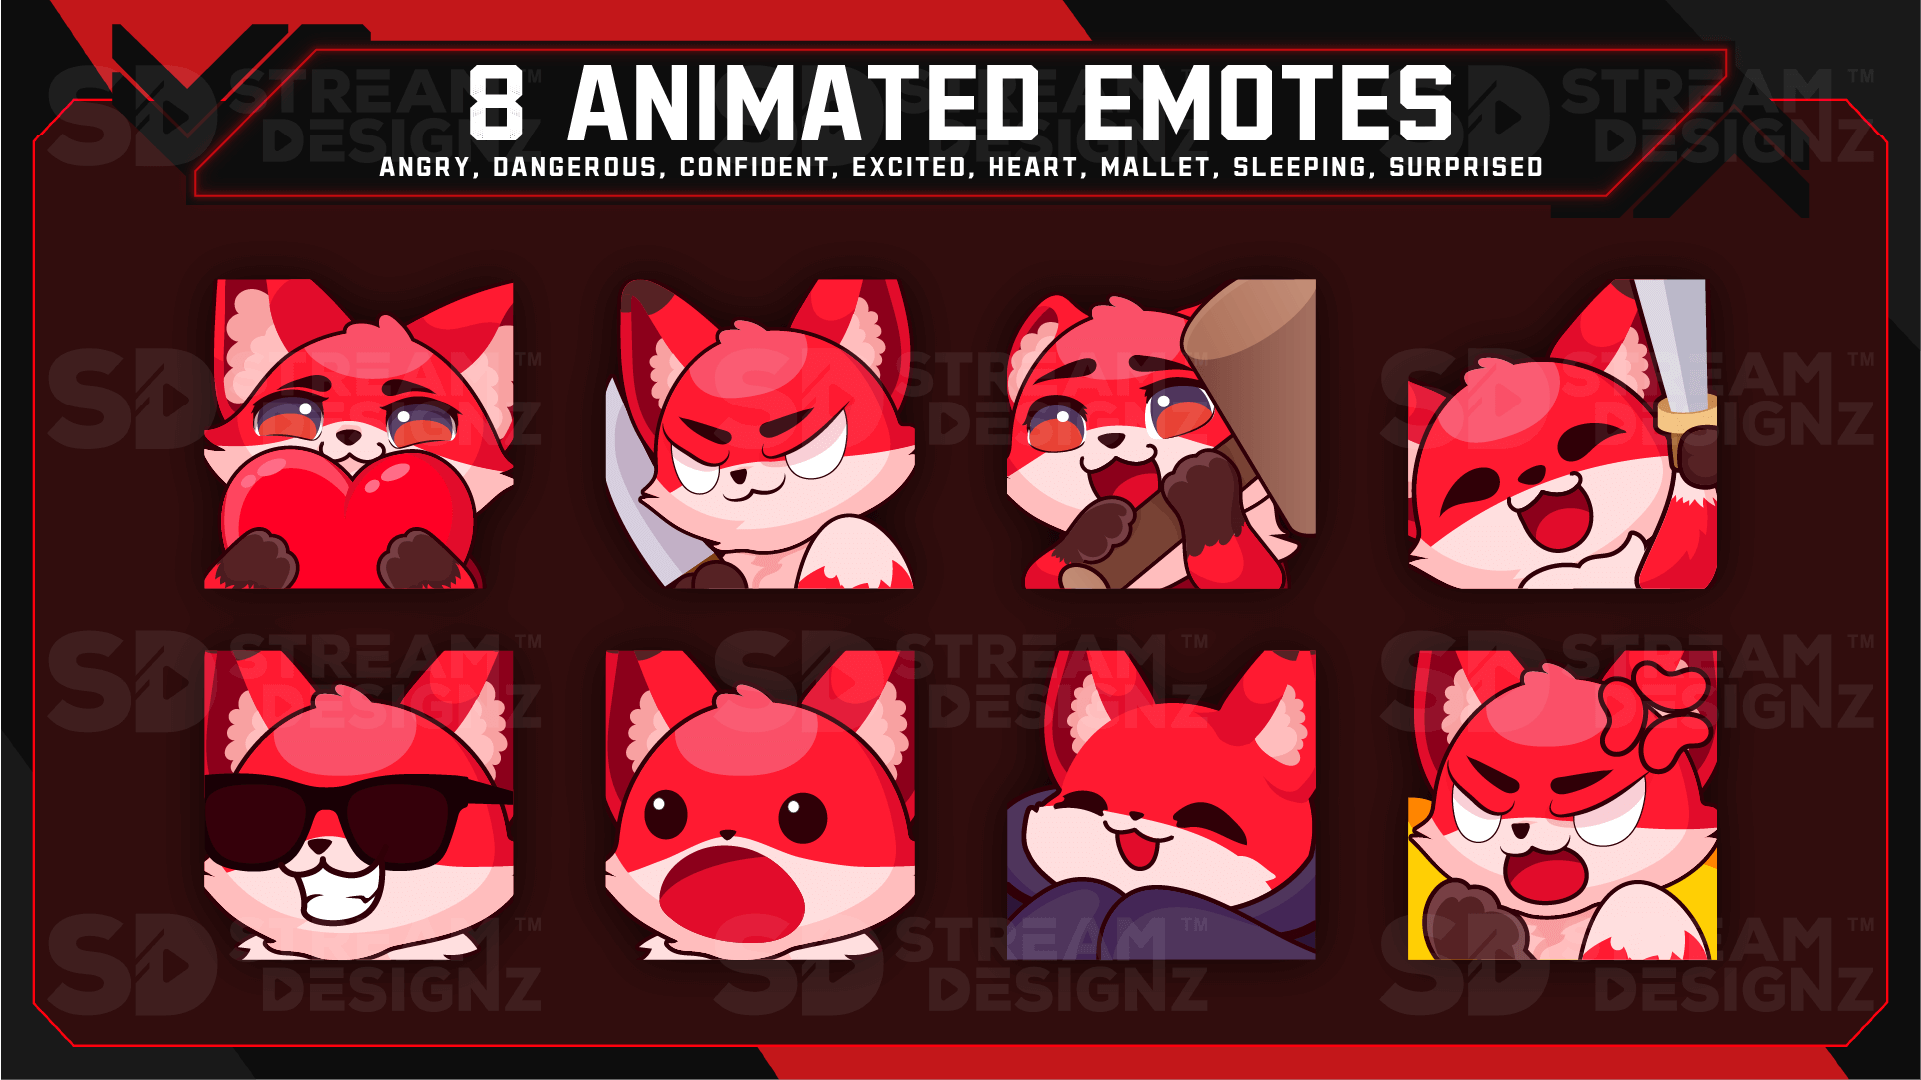 Ultimate stream package 8 animated emotes code red stream designz